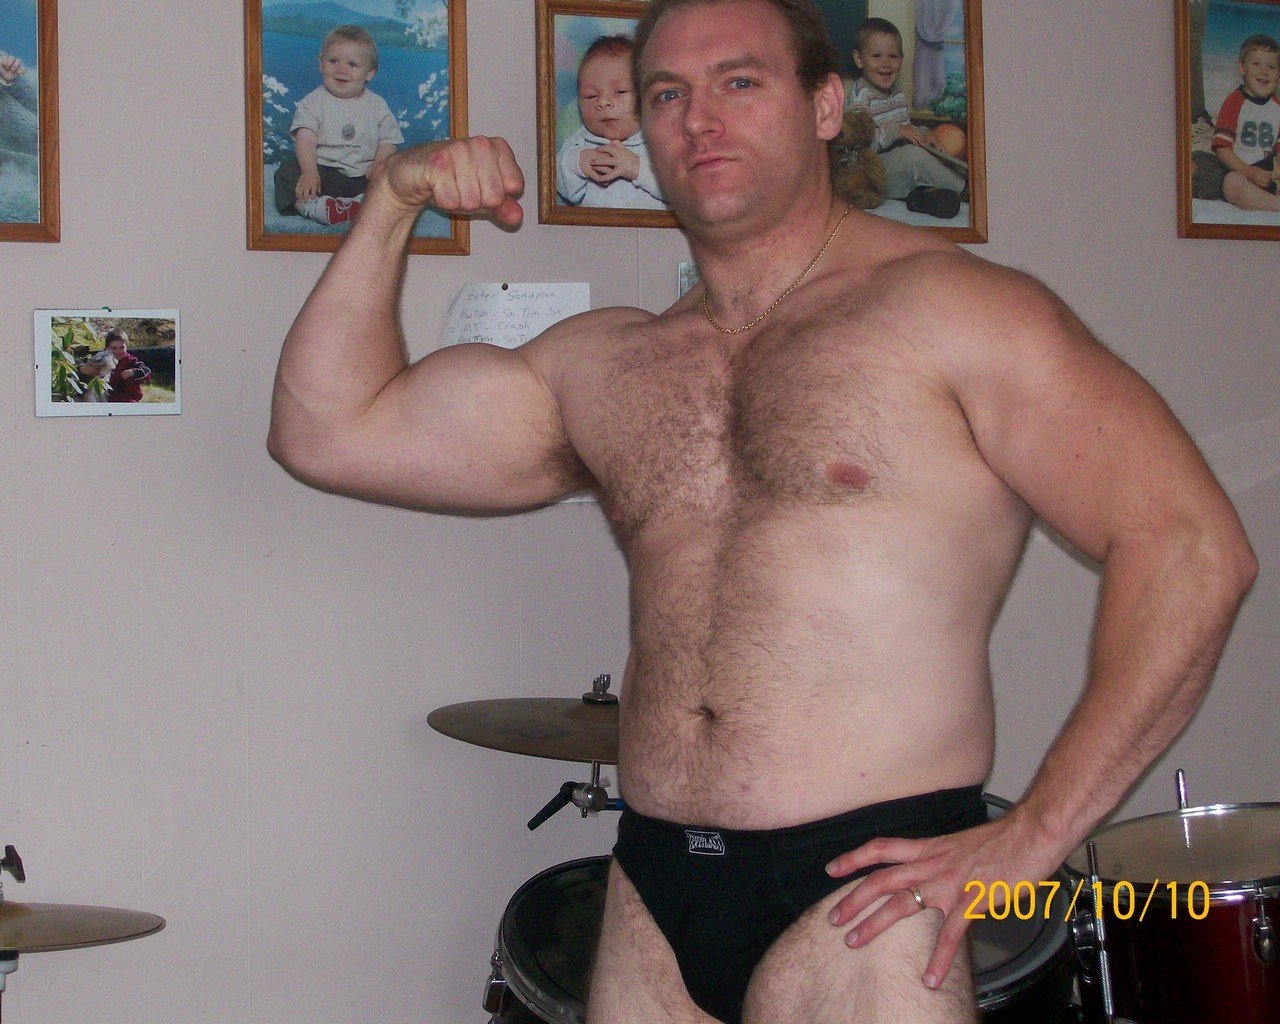 Photo by Hairy Musclebears with the username @hairymusclebears,  August 24, 2019 at 12:15 PM. The post is about the topic GayTumblr and the text says 'Muscledaddy Beefy Strong Bear from USAFUR.com galleries  #gym #cardio #weightlift #gaypoland #weightlifting #athlete #gayjapan #bodybuilders #musclebuilding #shoulder #bicep #glorious #splendid #beautiful #macho #jock #boy #stud #guy #dude #nerd #devotion..'